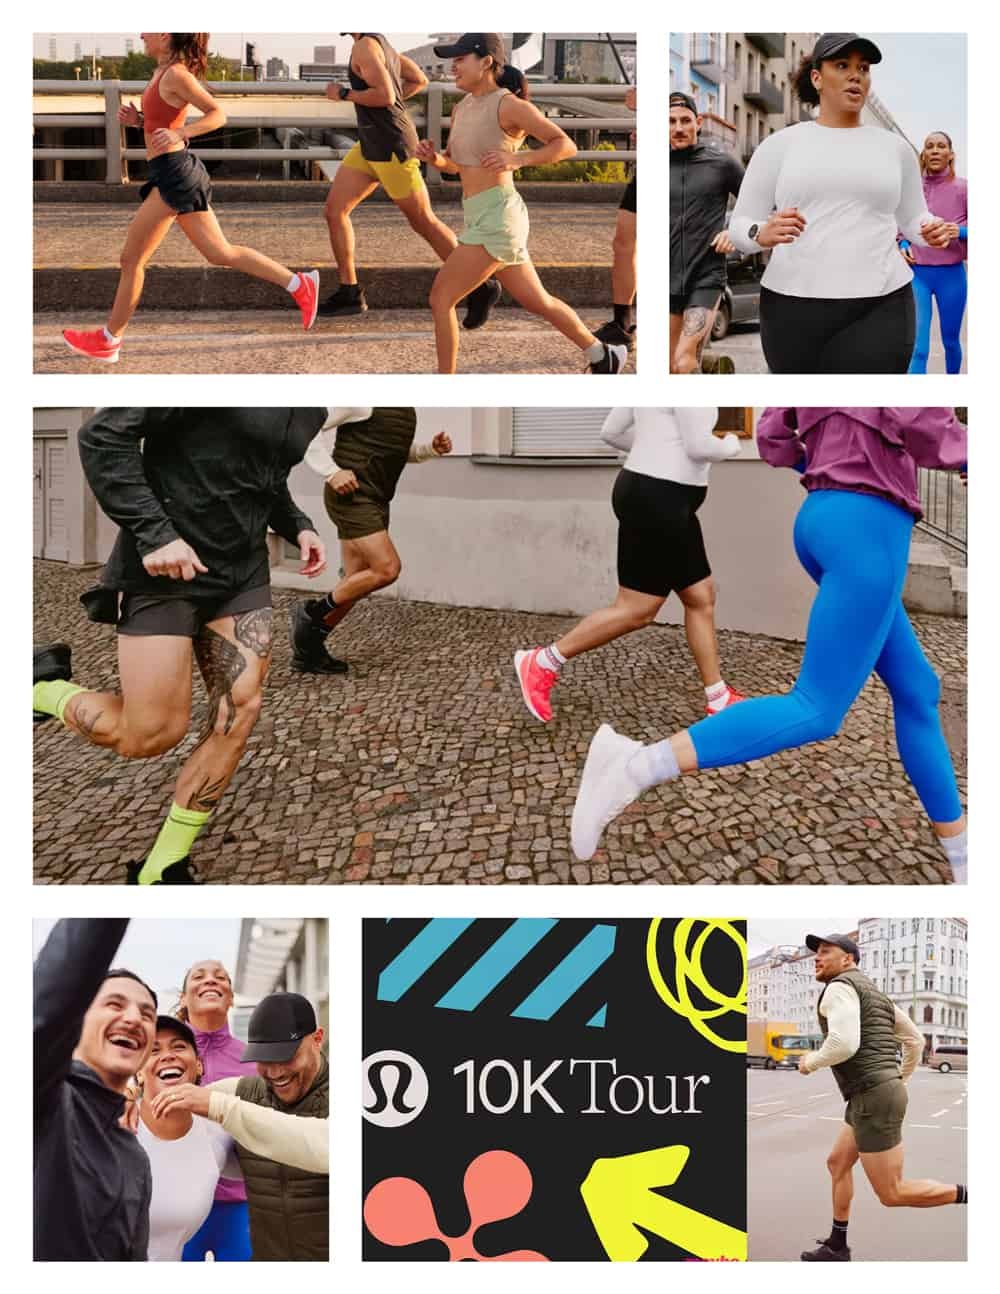 lululemon 10K Race Tour Coming inperson across U.S. cities — MAYBE.YES